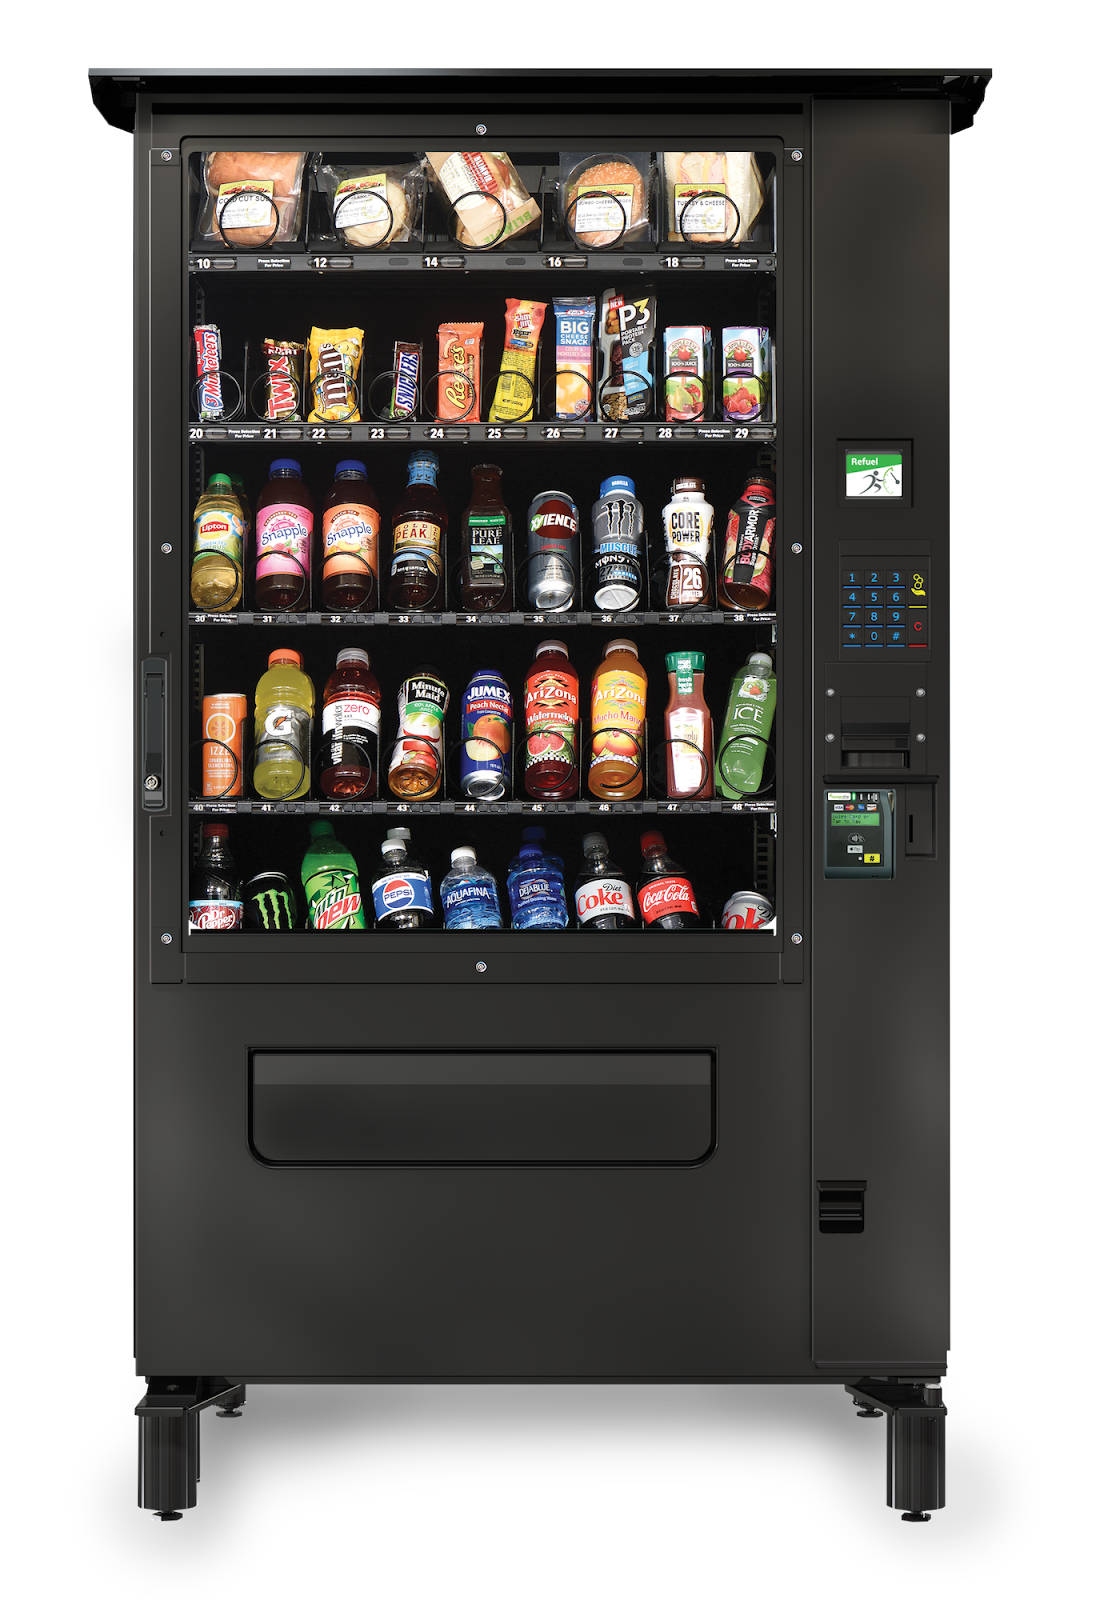 What to Look for Before Purchasing a Vending Machine